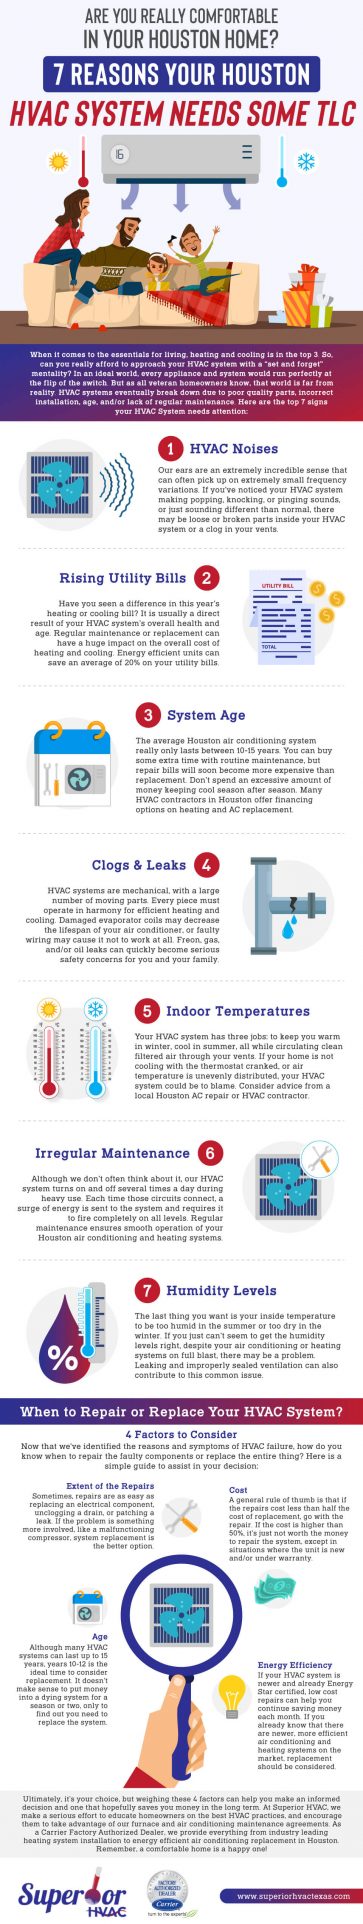 7 Reasons Your Houston HVAC System Needs Some TLC